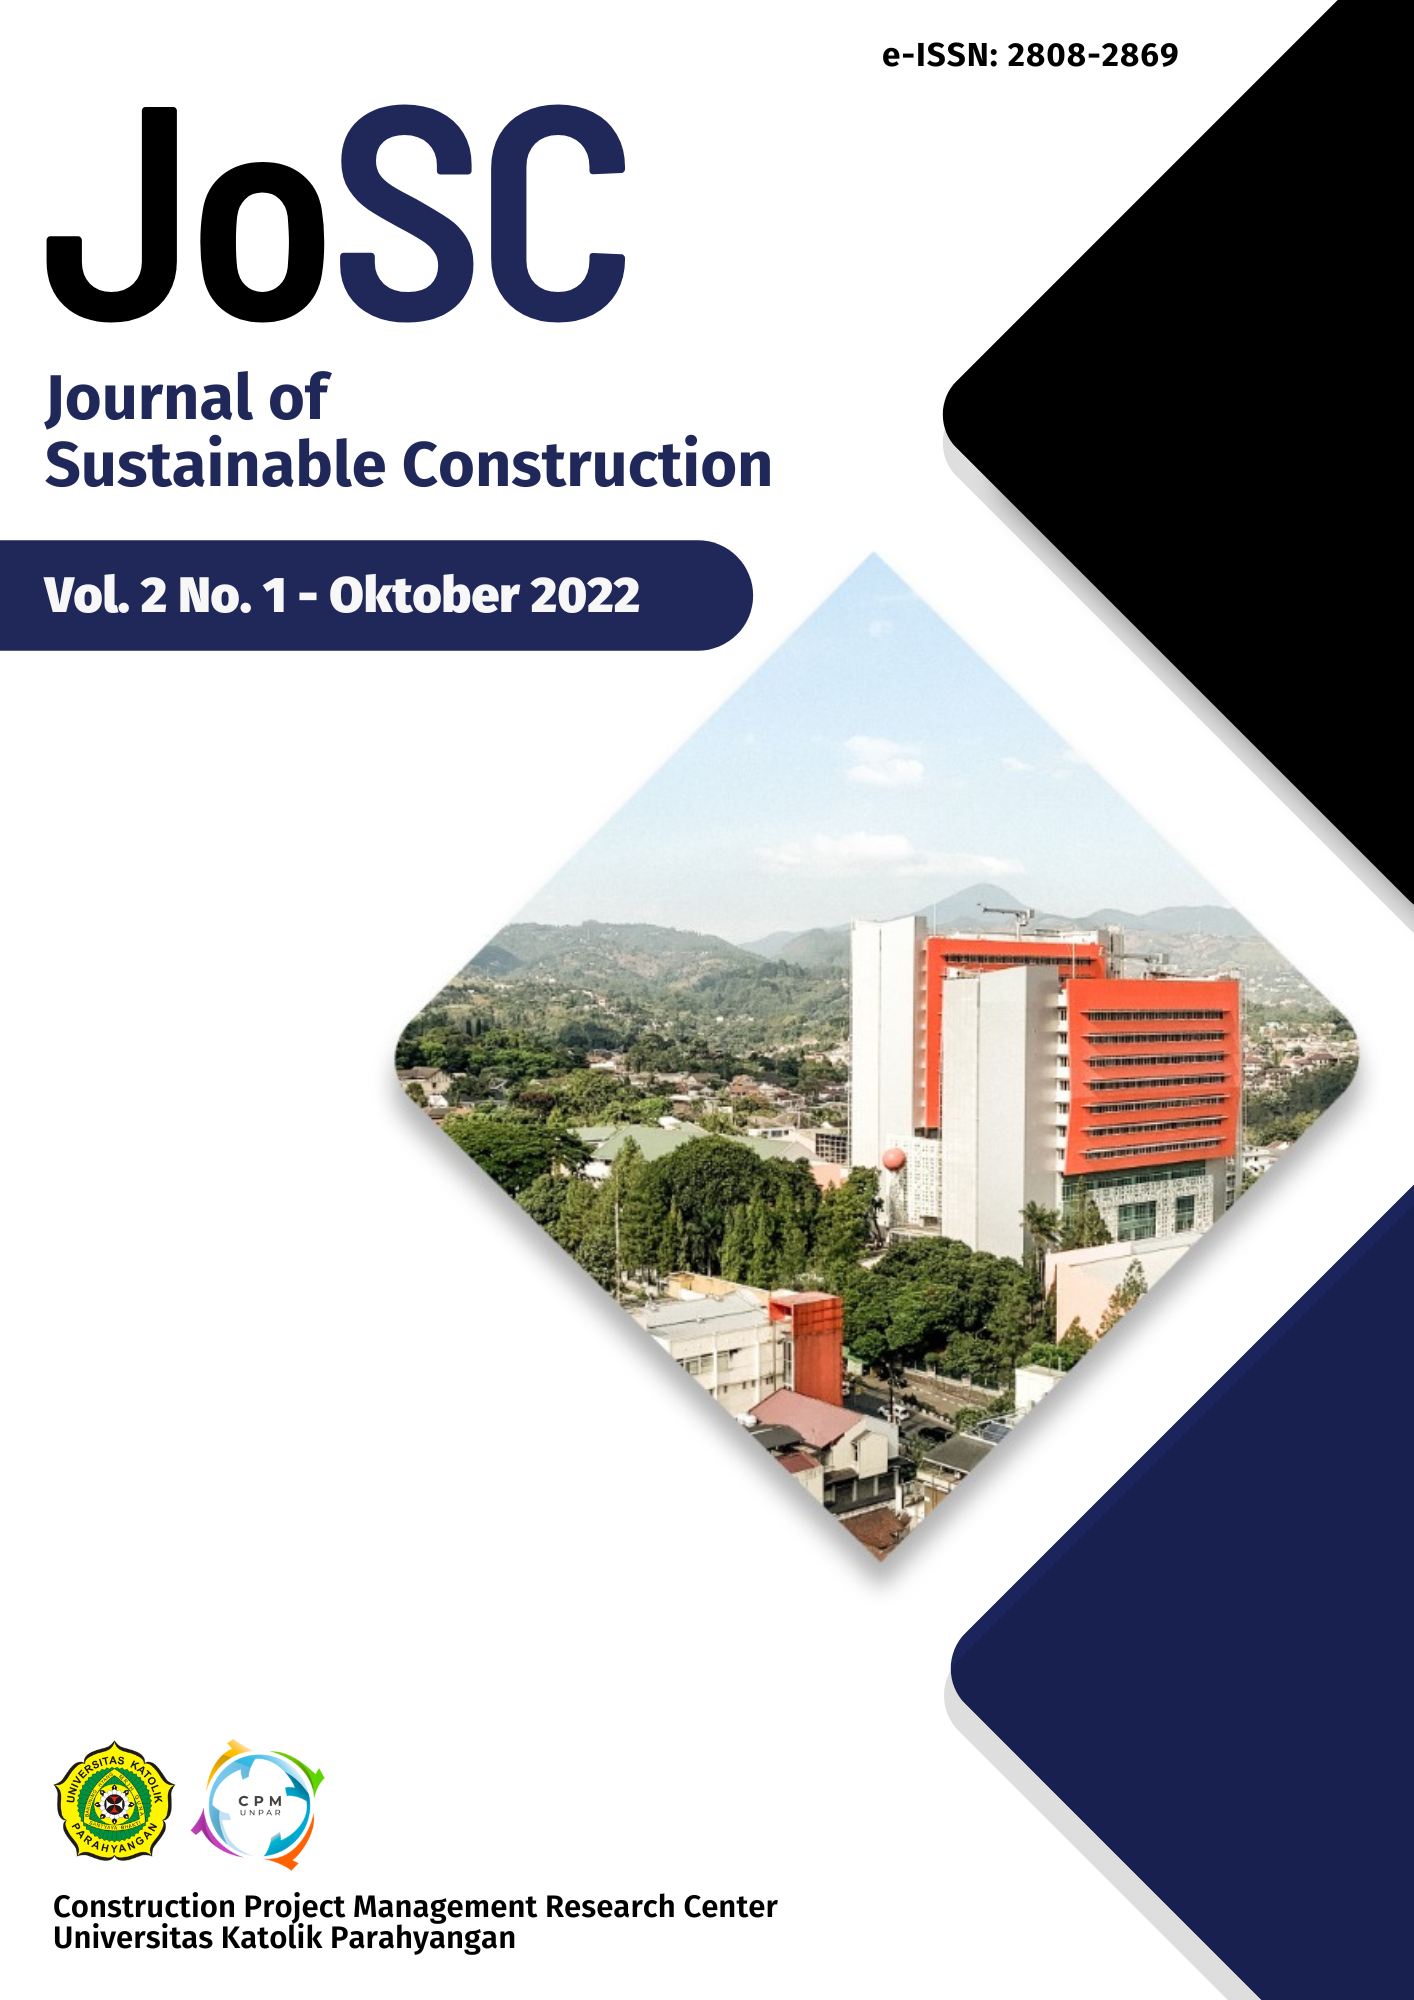 					Lihat Vol 2 No 1 (2022): Journal of Sustainable Construction
				